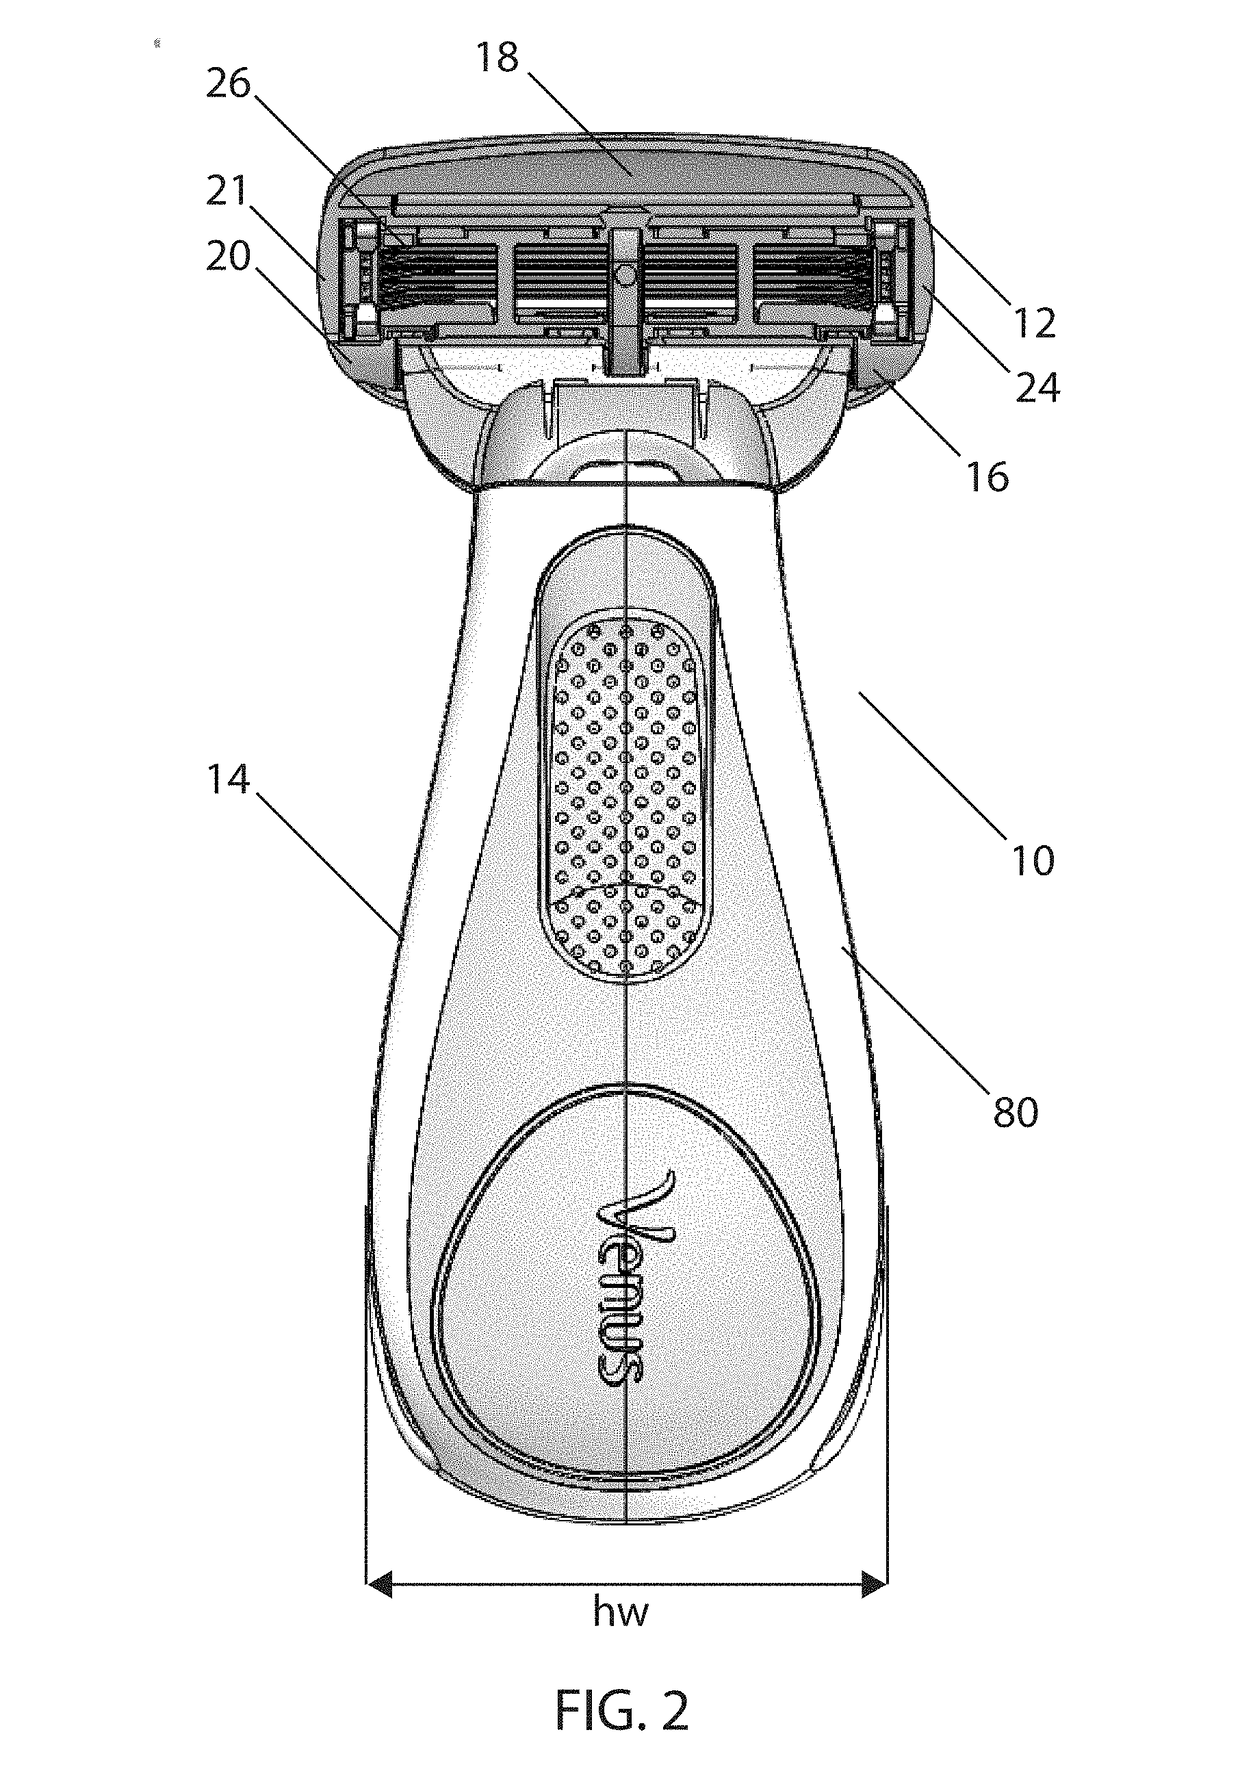 Hair removal device for pubic hair